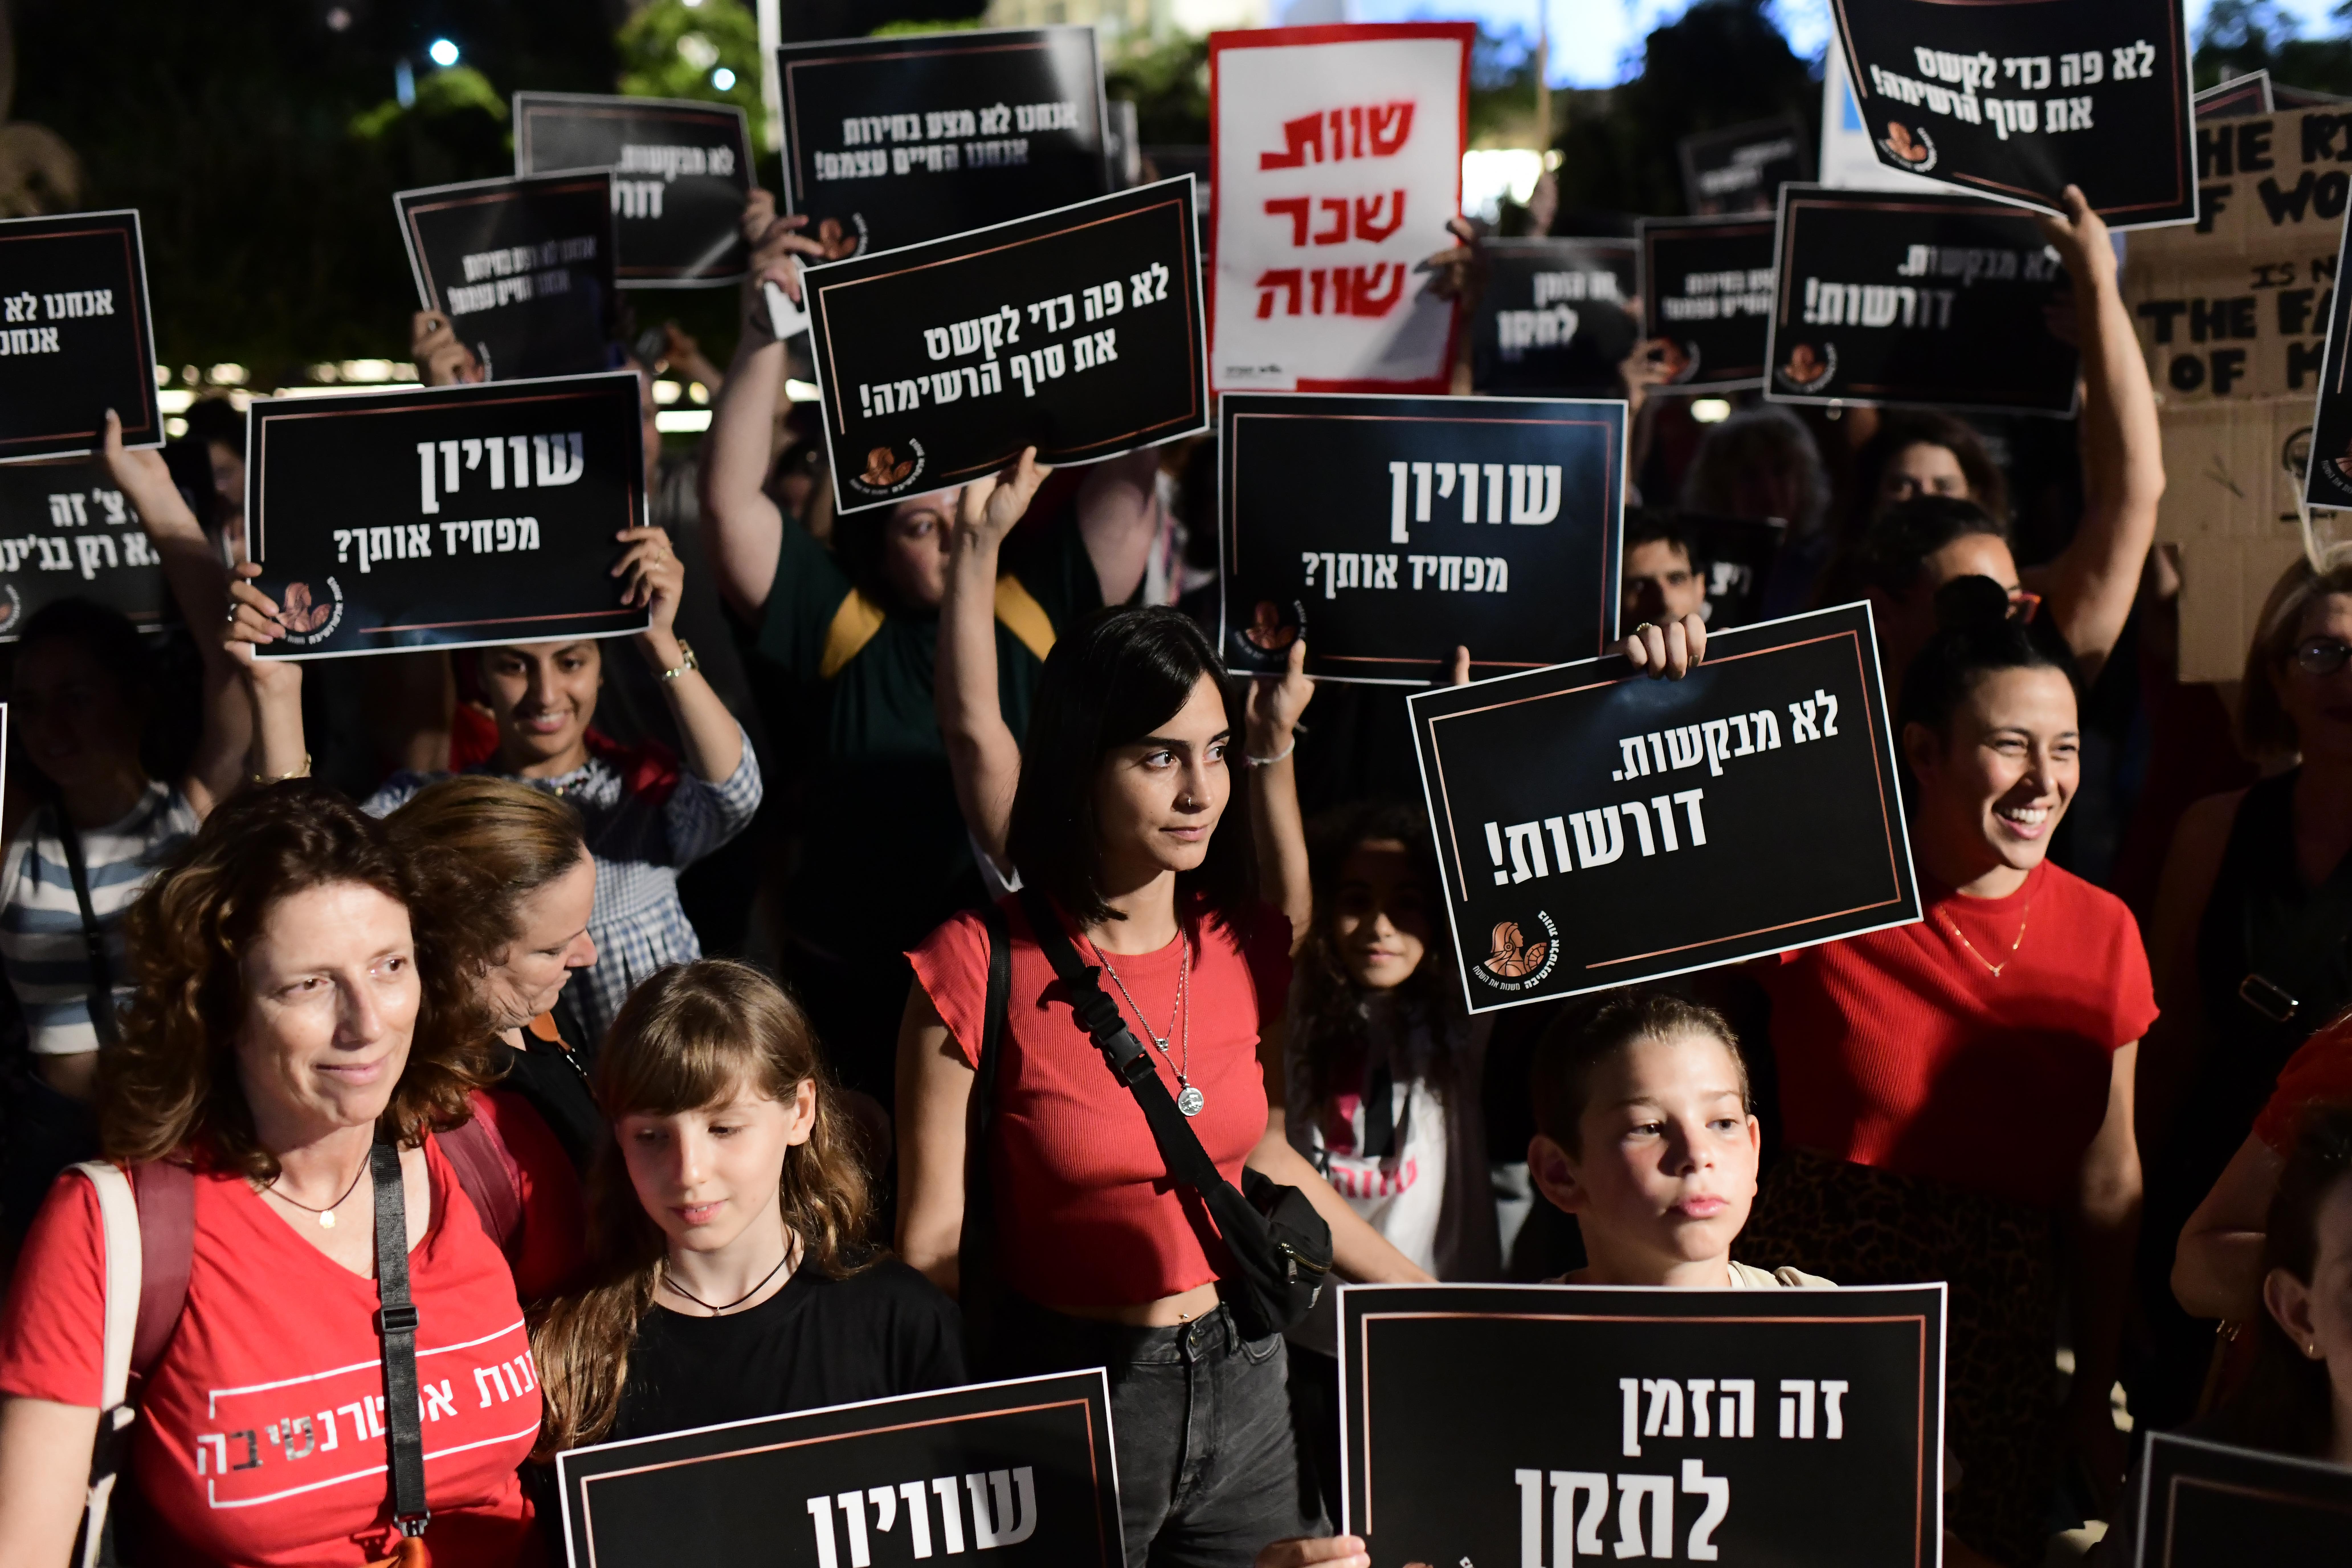 Israel's Labor Party faces backlash for unauthorised use of